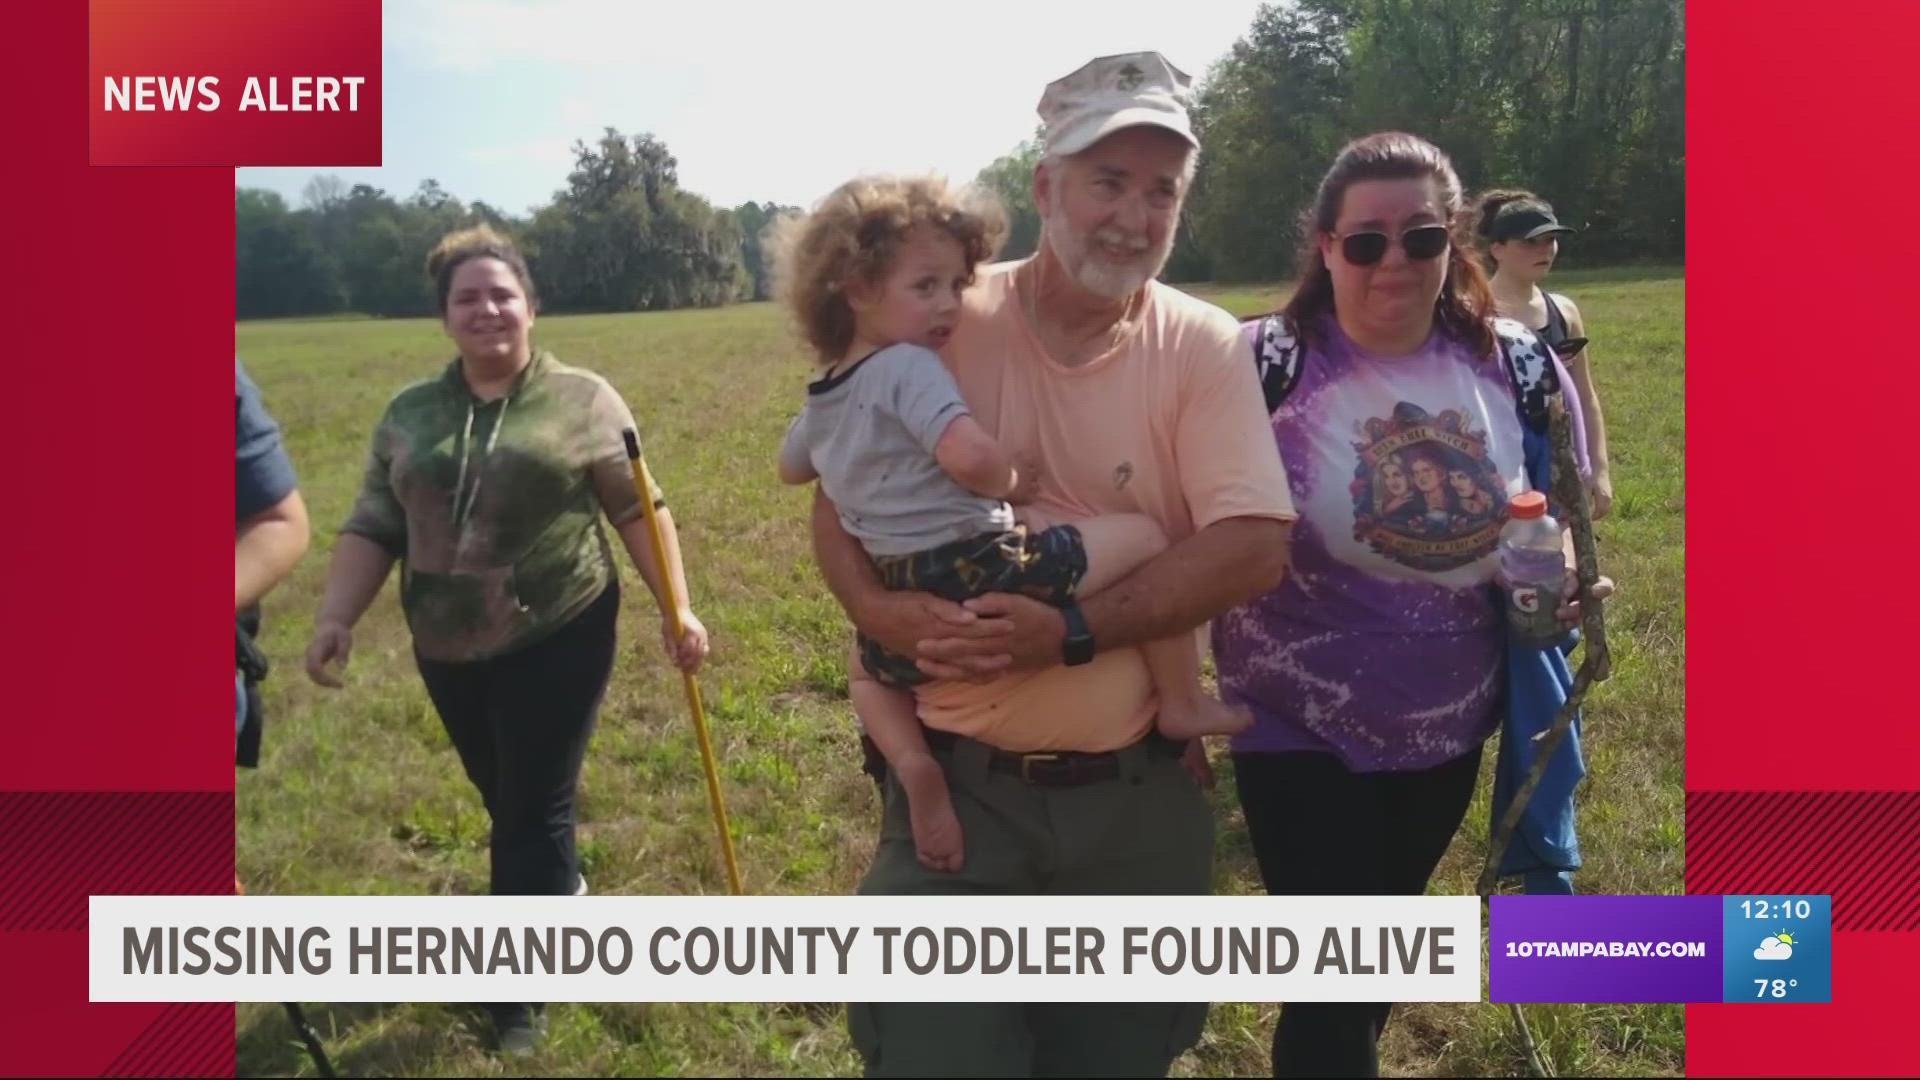 After a grueling evening, night and morning of searching, the search for a missing 2-year-old boy is over. Joshua "JJ" Rowland has been found safe.